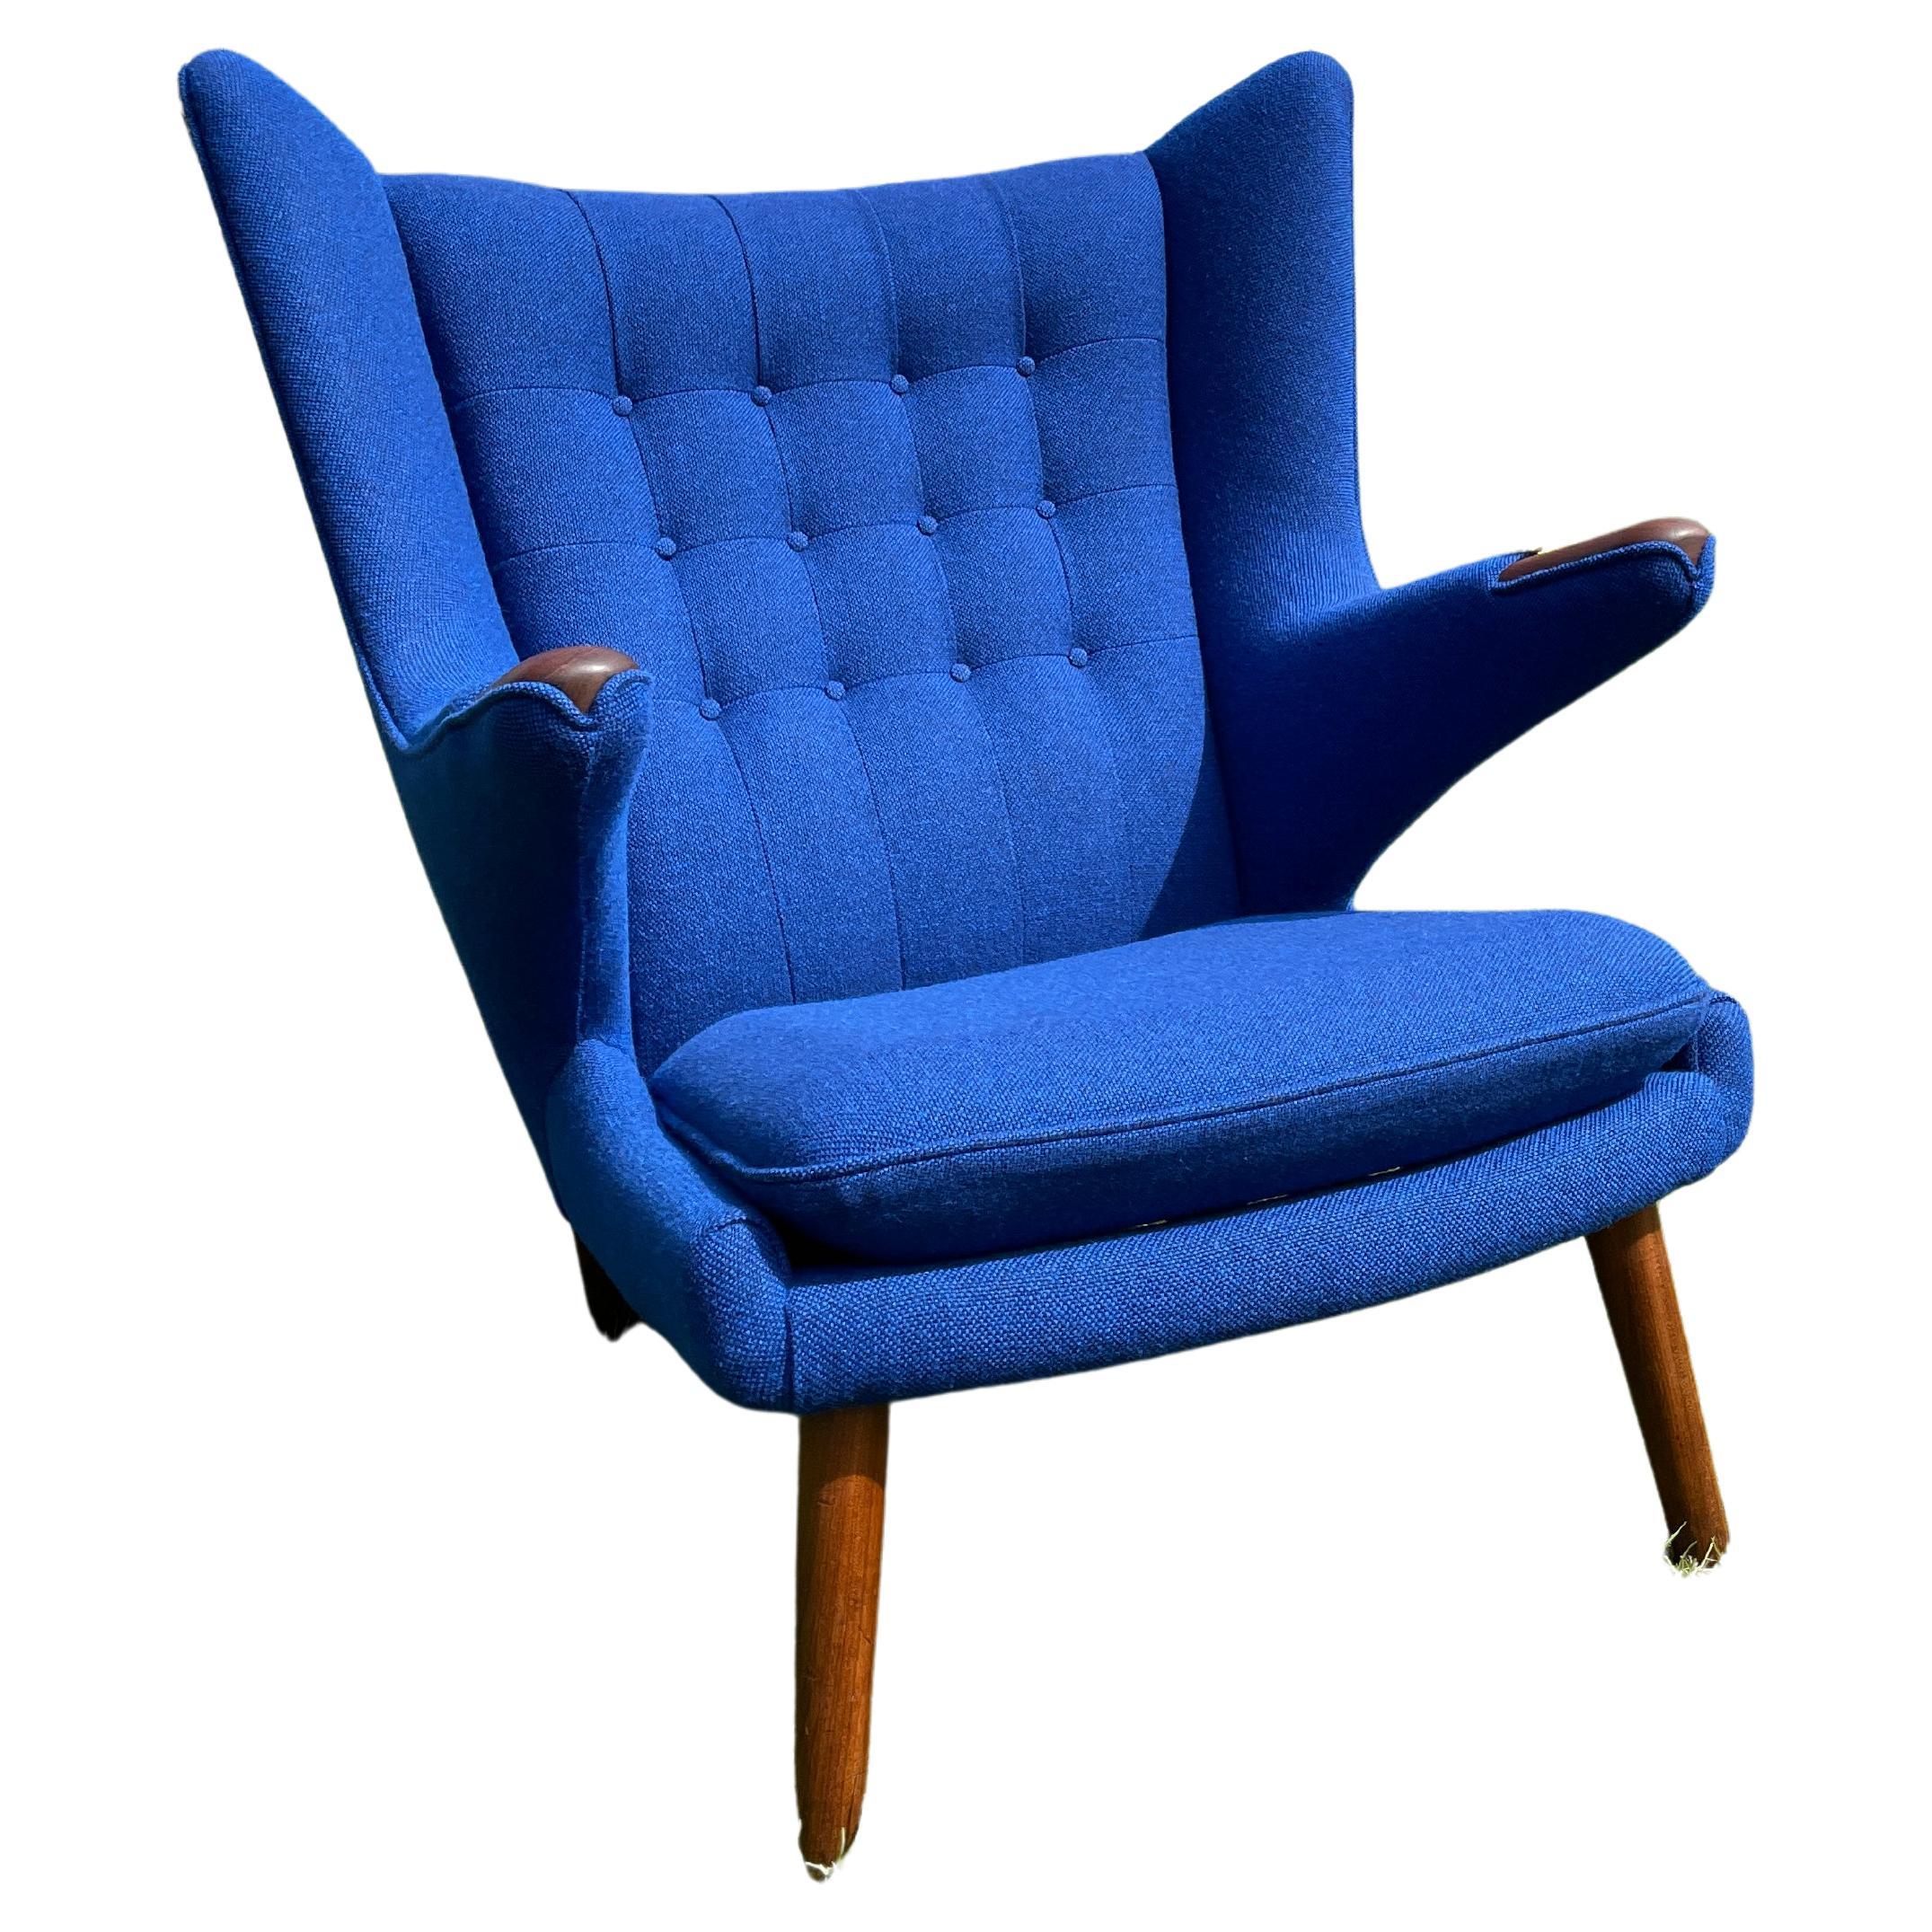 This chair is the original Papa bear chair designed and made in 50s by Hans J. Wegner and made by A.P. Mobler and has been reupholstered in very accurate way by our favourite professional upholsterer.
Fabric is Blue Kvadrat Wool, Hallingdal and has